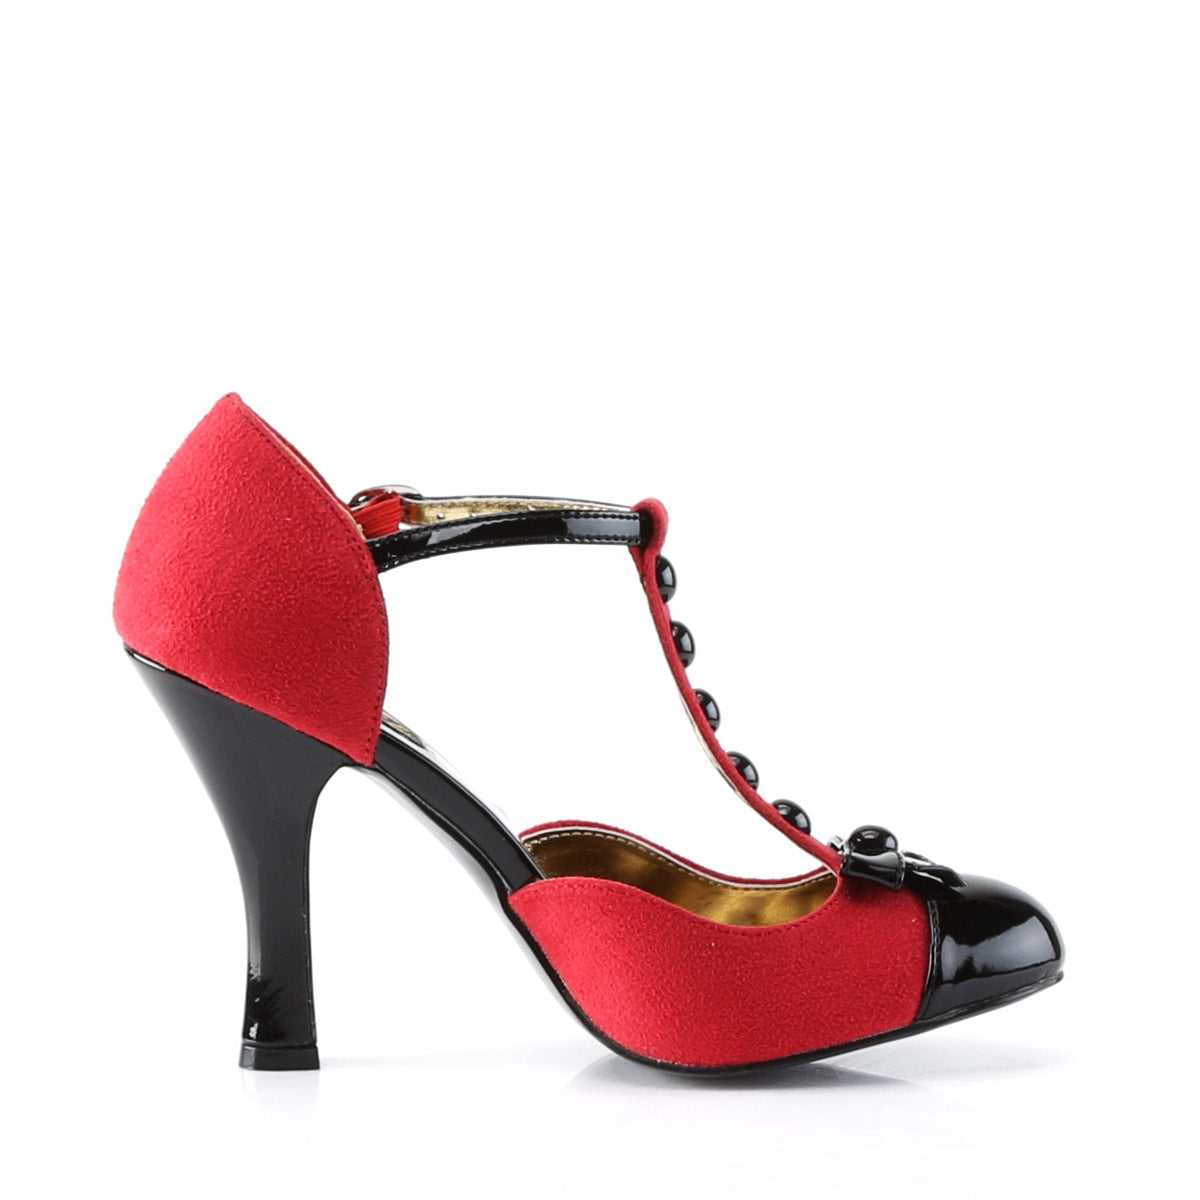 Sexy T-Strap Spat D'Orsay Pumps Mini Bow Spool High Heels Shoes Pleaser Pin Up Couture SMITTEN/10